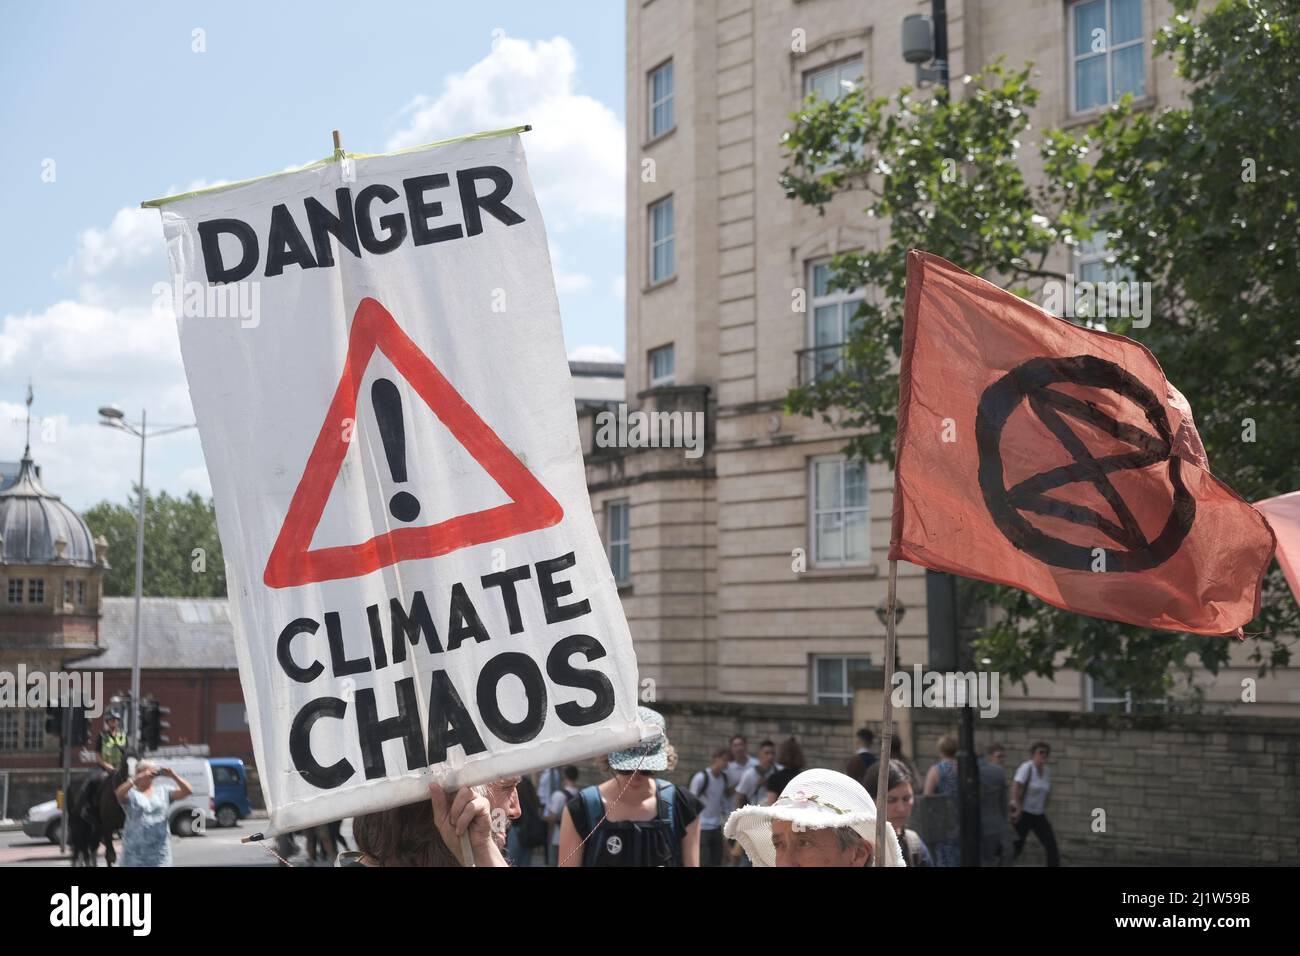 'Danger climate chaos' placard and Extinction Rebellion flag. Climate change protest march, Bristol, England, UK. 16 July 2019. Stock Photo